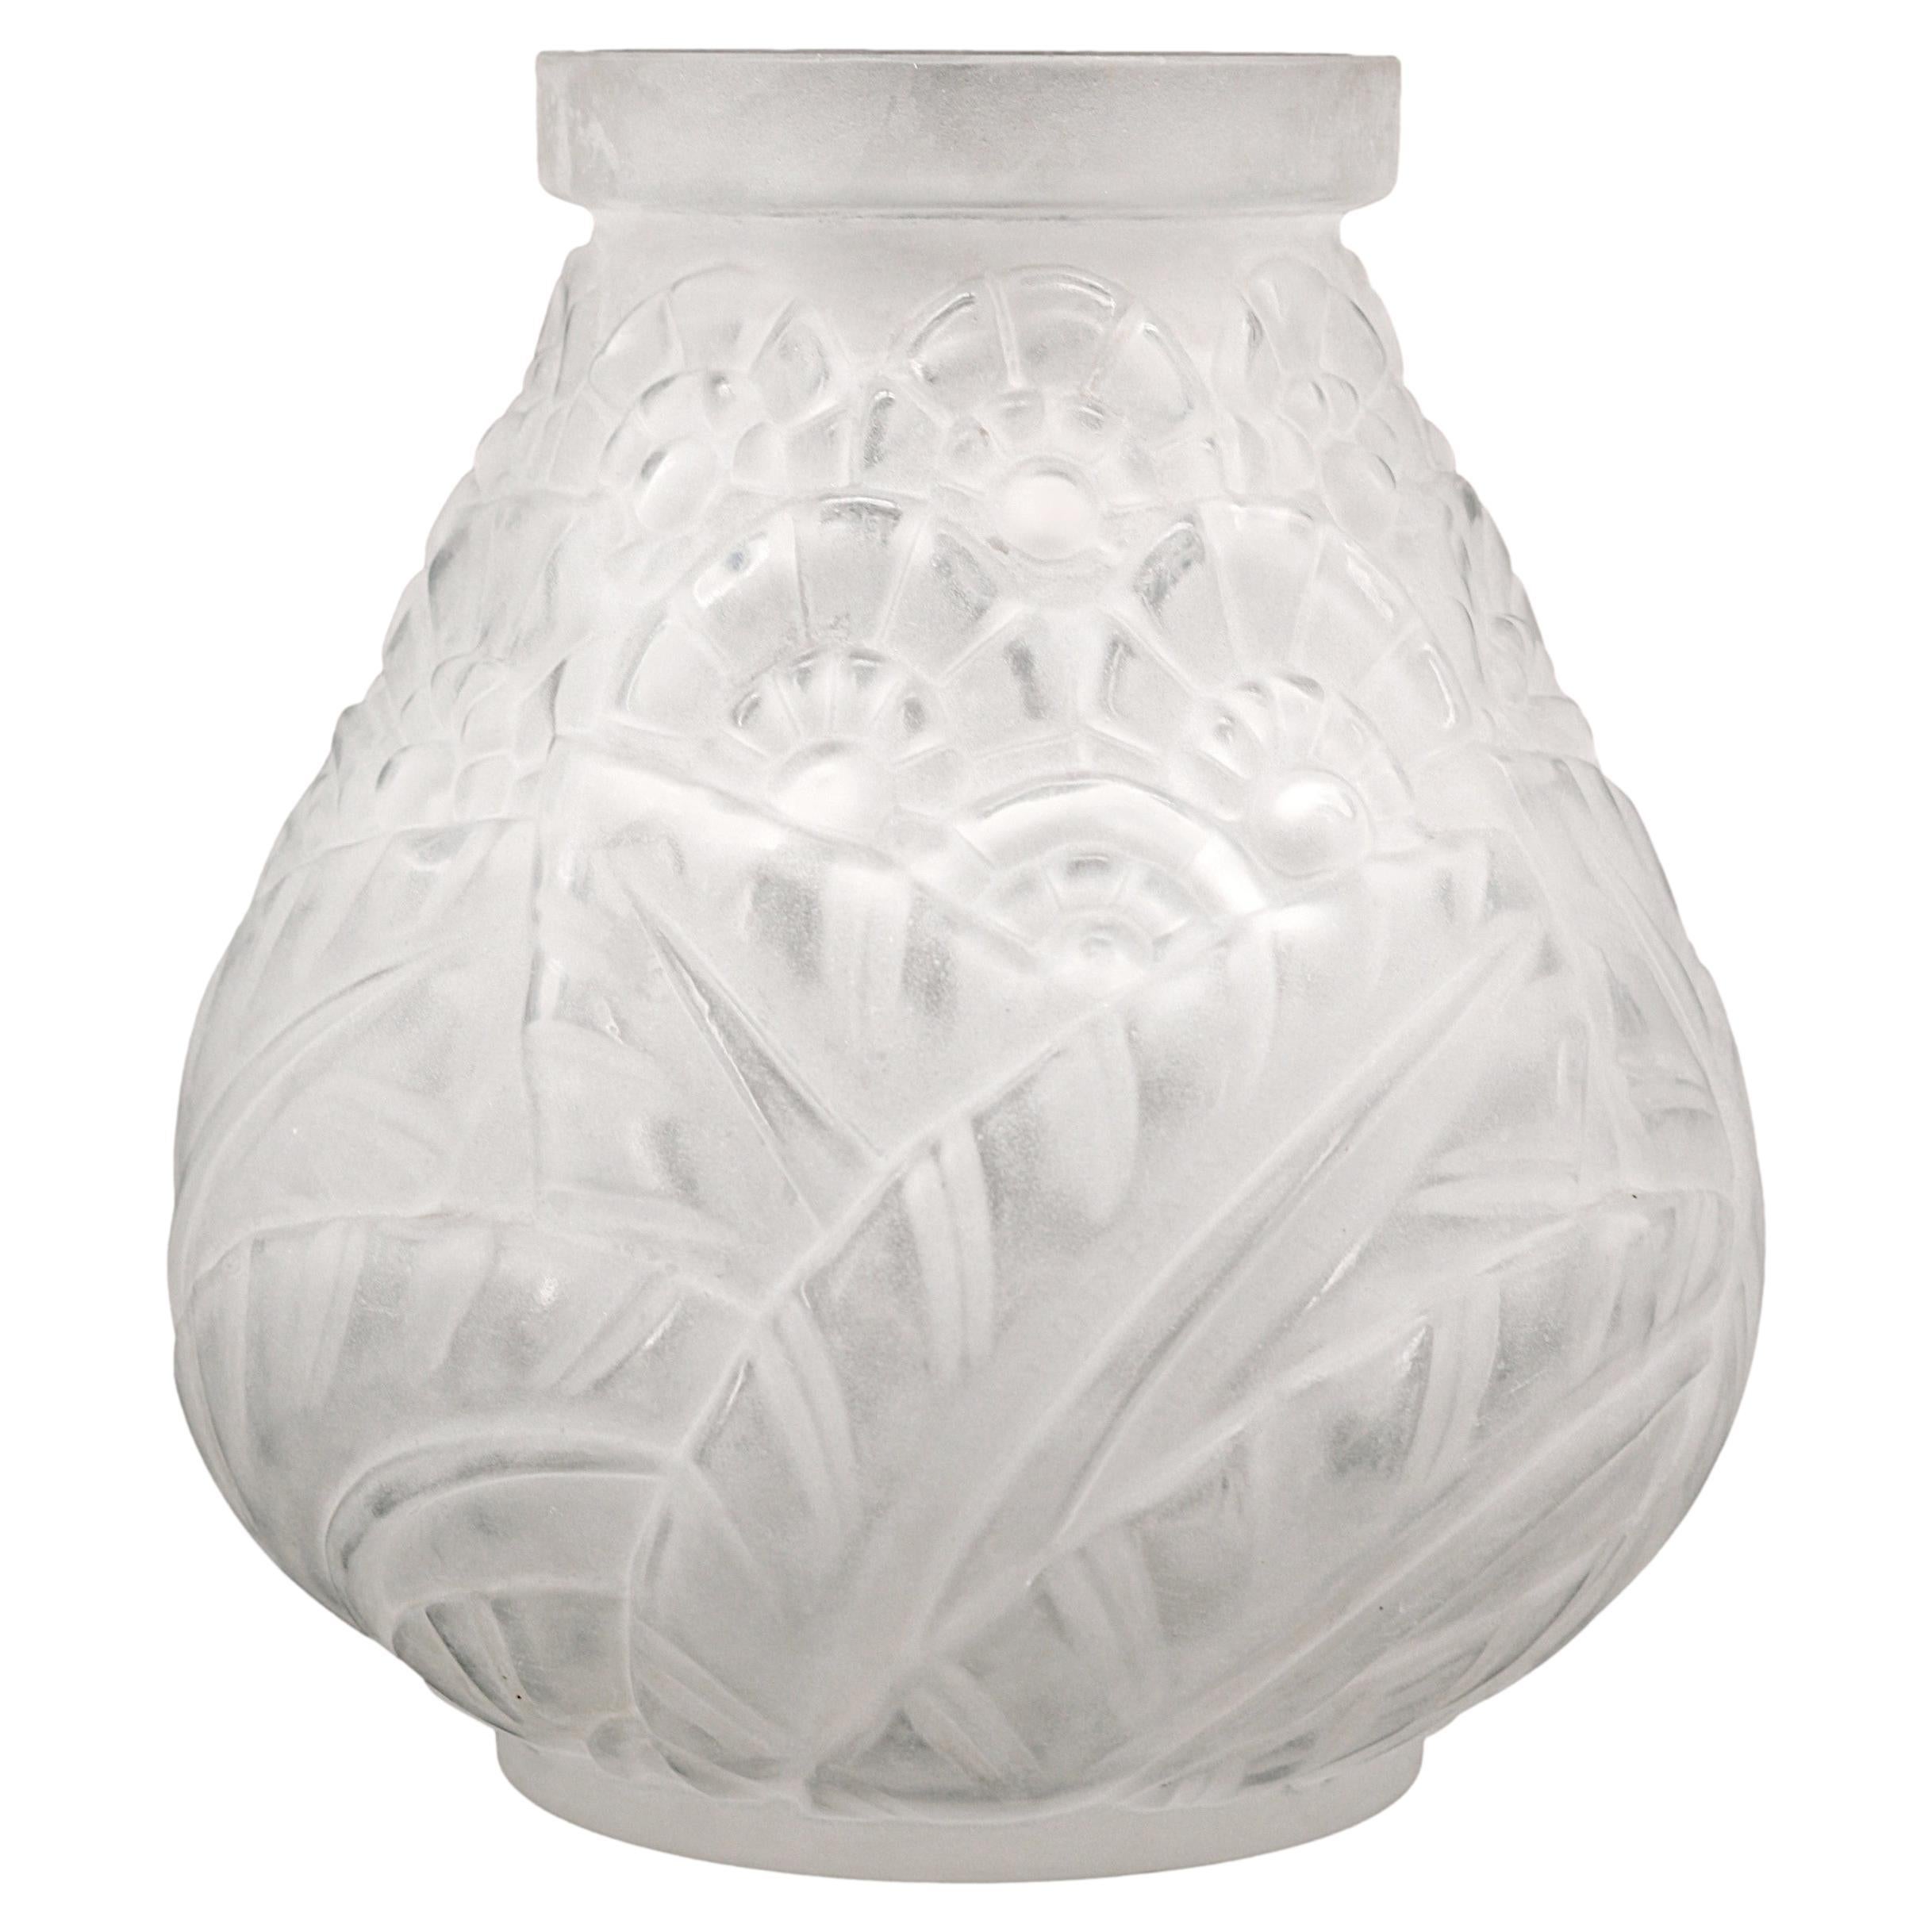 DAUM French Art Deco Frosted Glass Vase, Late 1920s For Sale